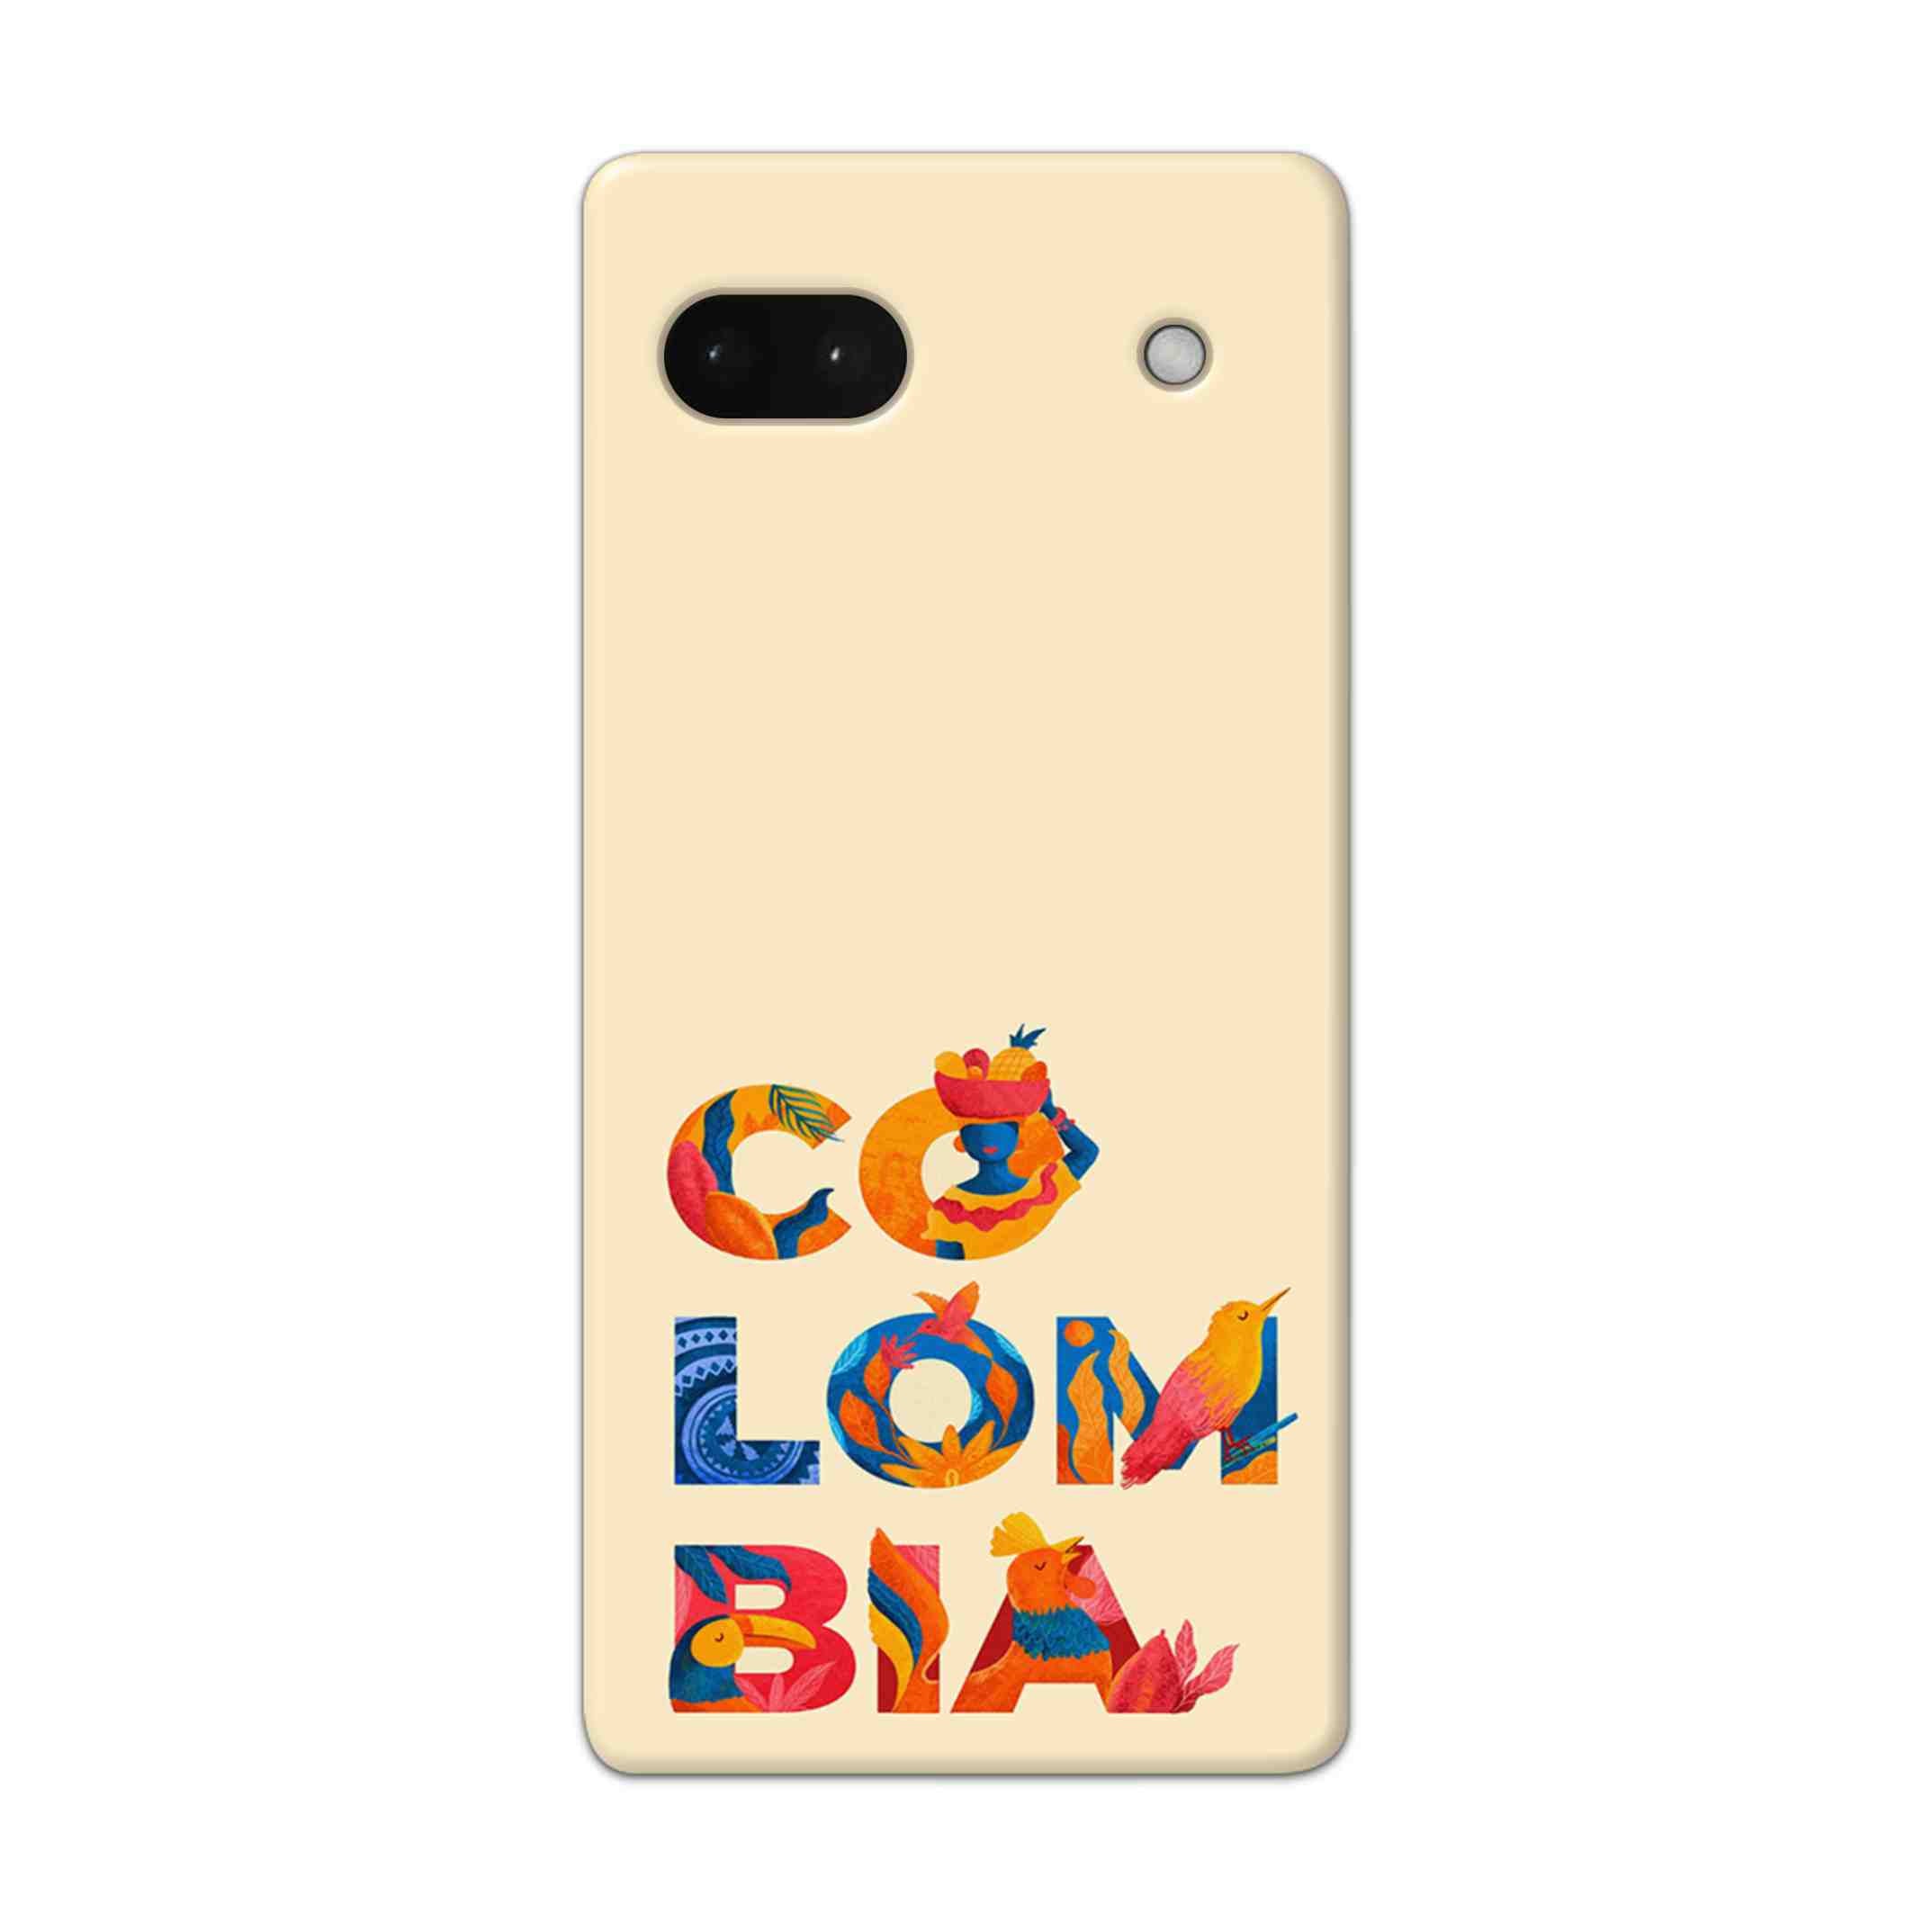 Buy Colombia Hard Back Mobile Phone Case Cover For Google Pixel 6a Online